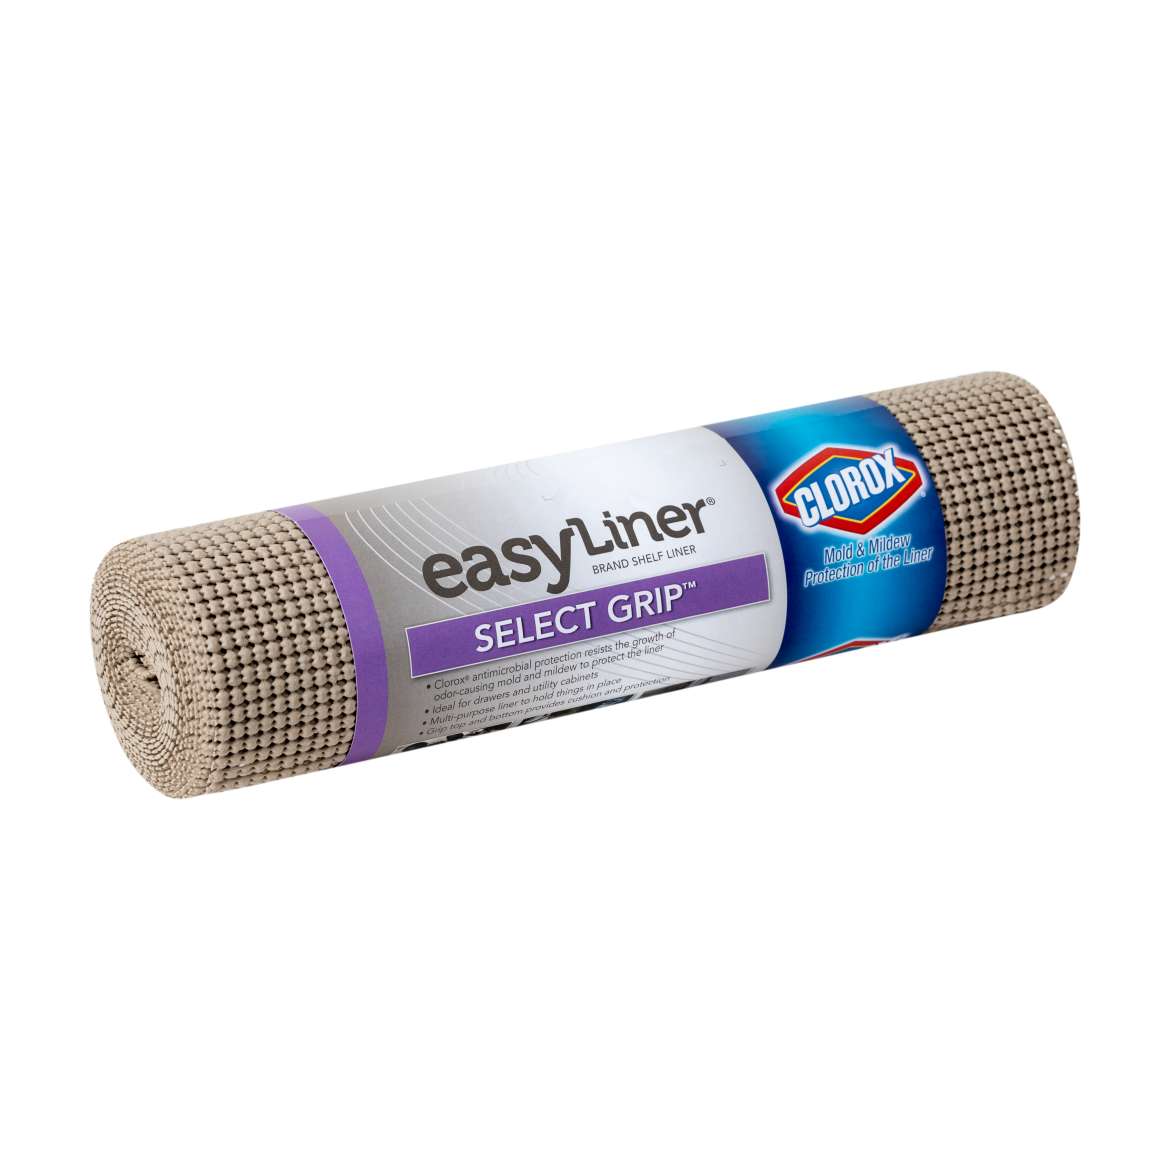 Select Grip™ EasyLiner® with Clorox® Image